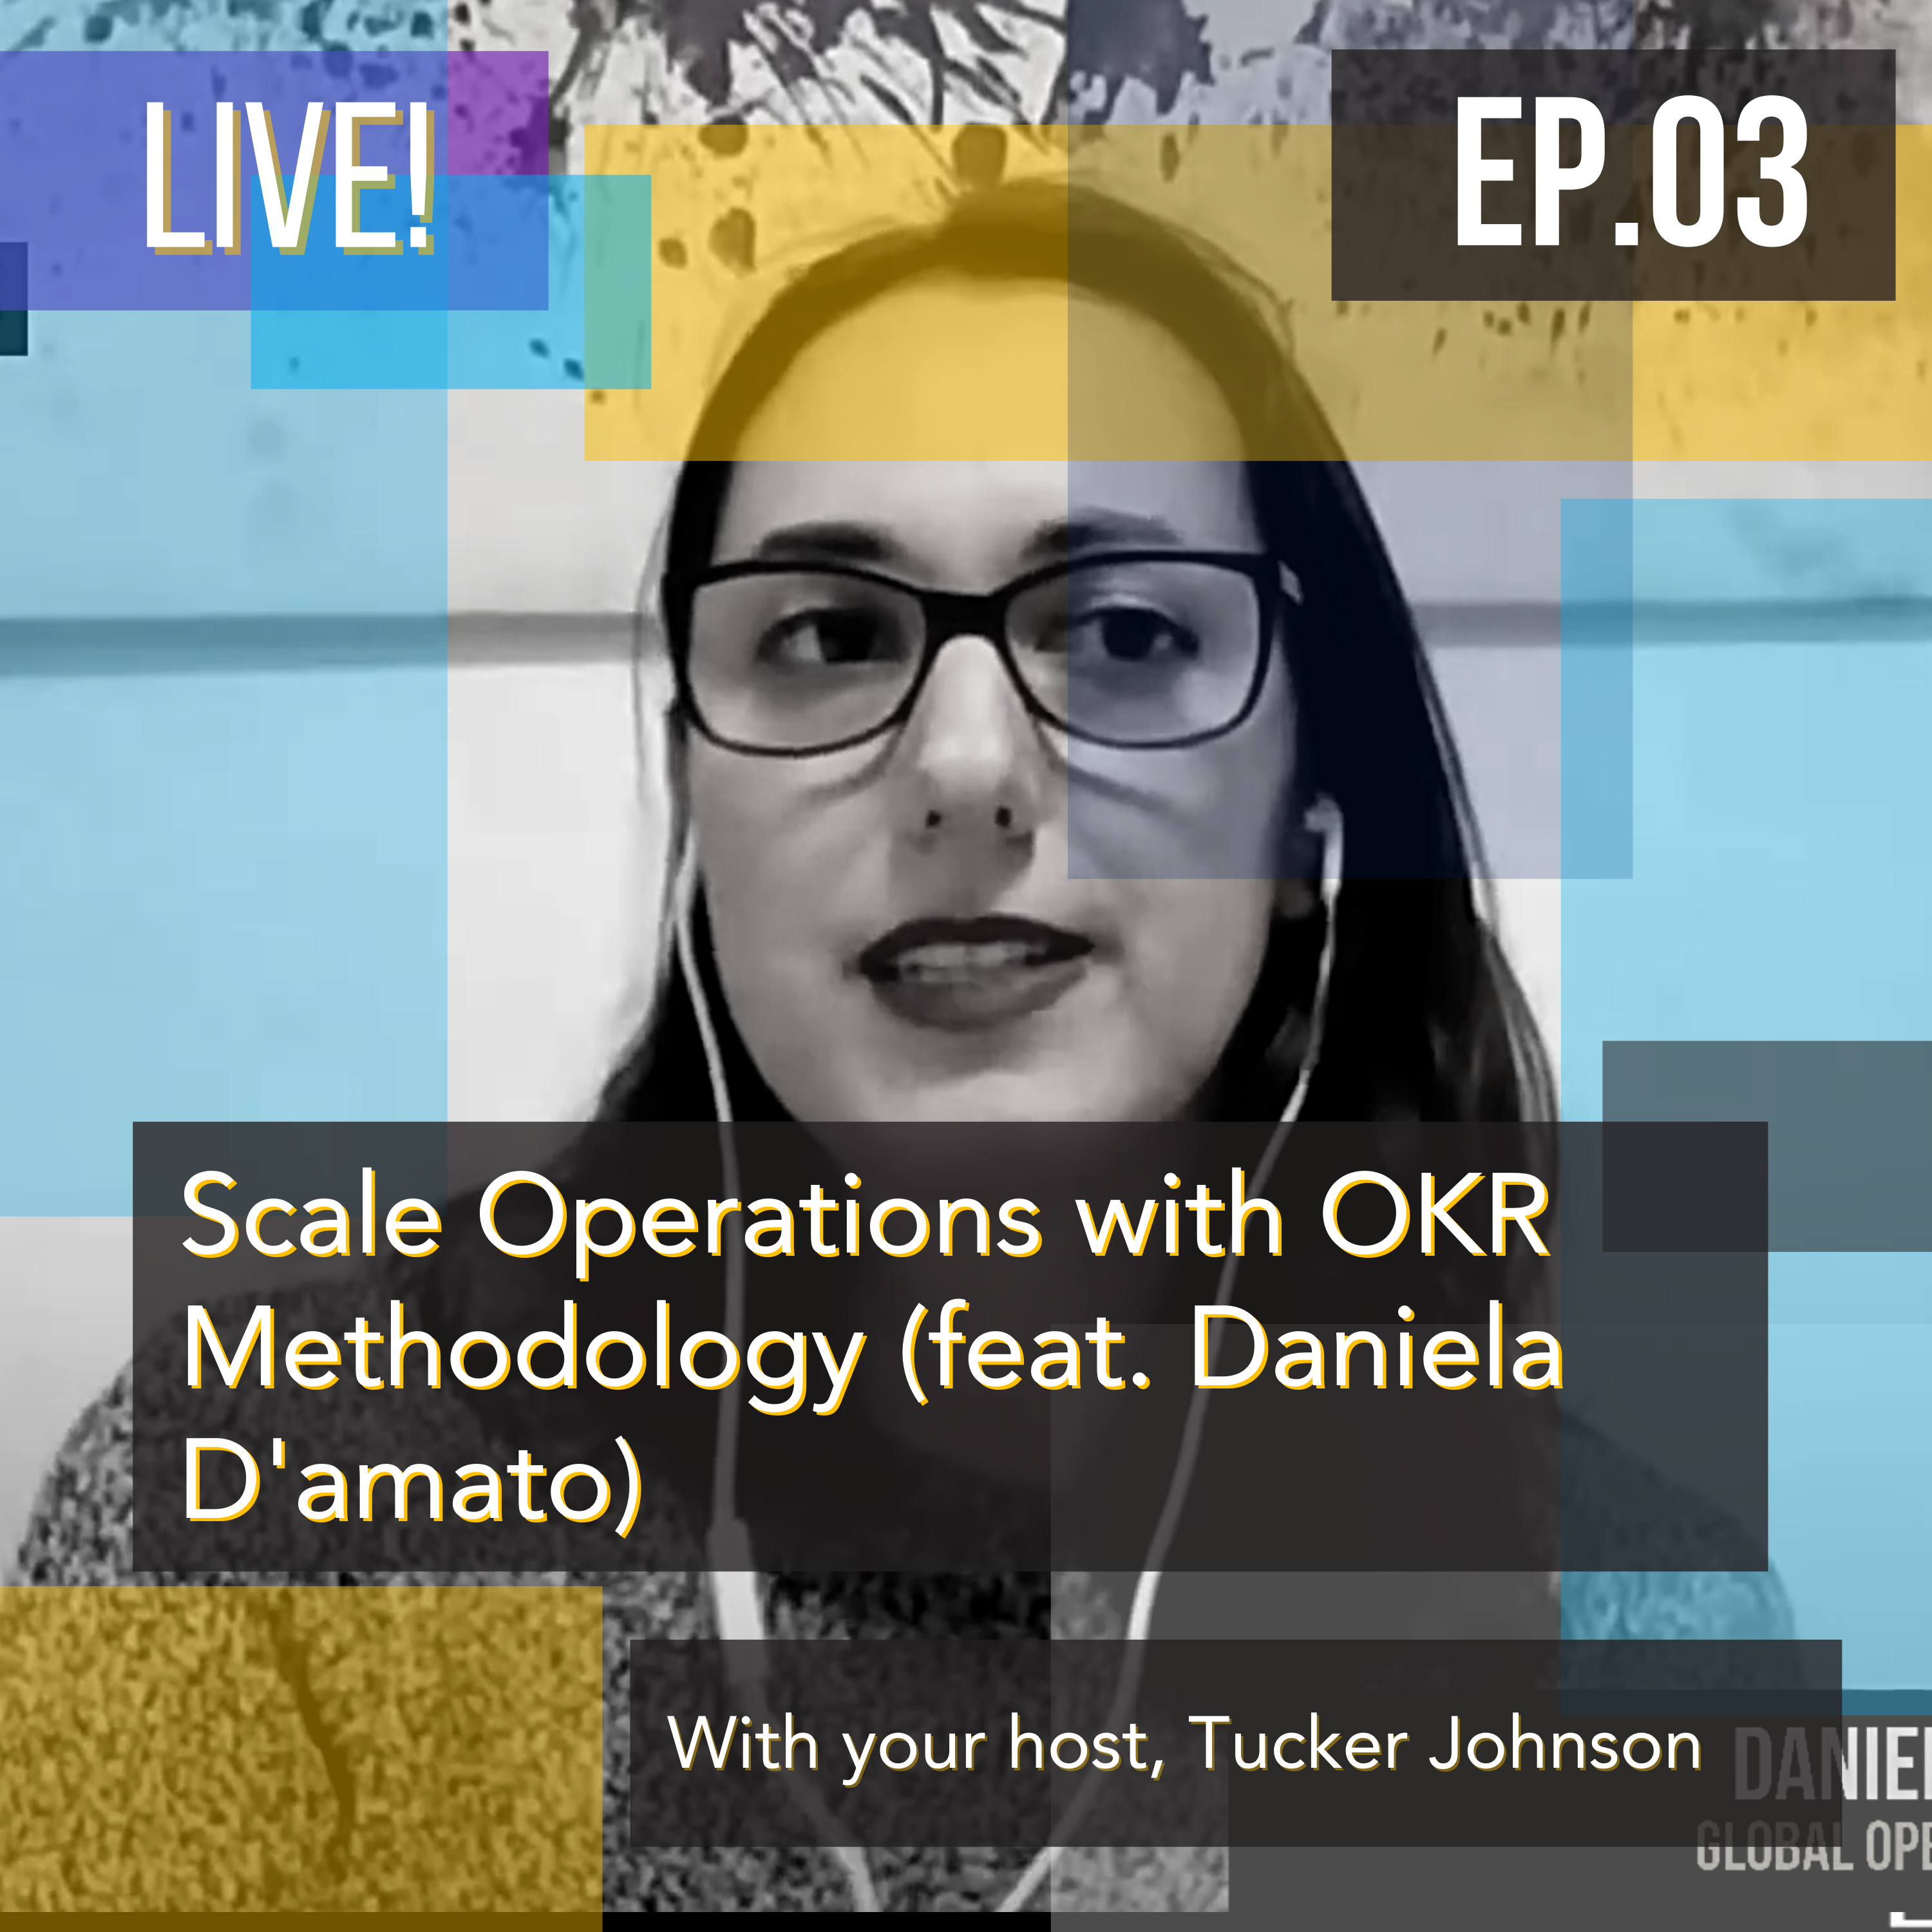 Scale Operations with OKR Methodology (feat. Daniela D'amato)